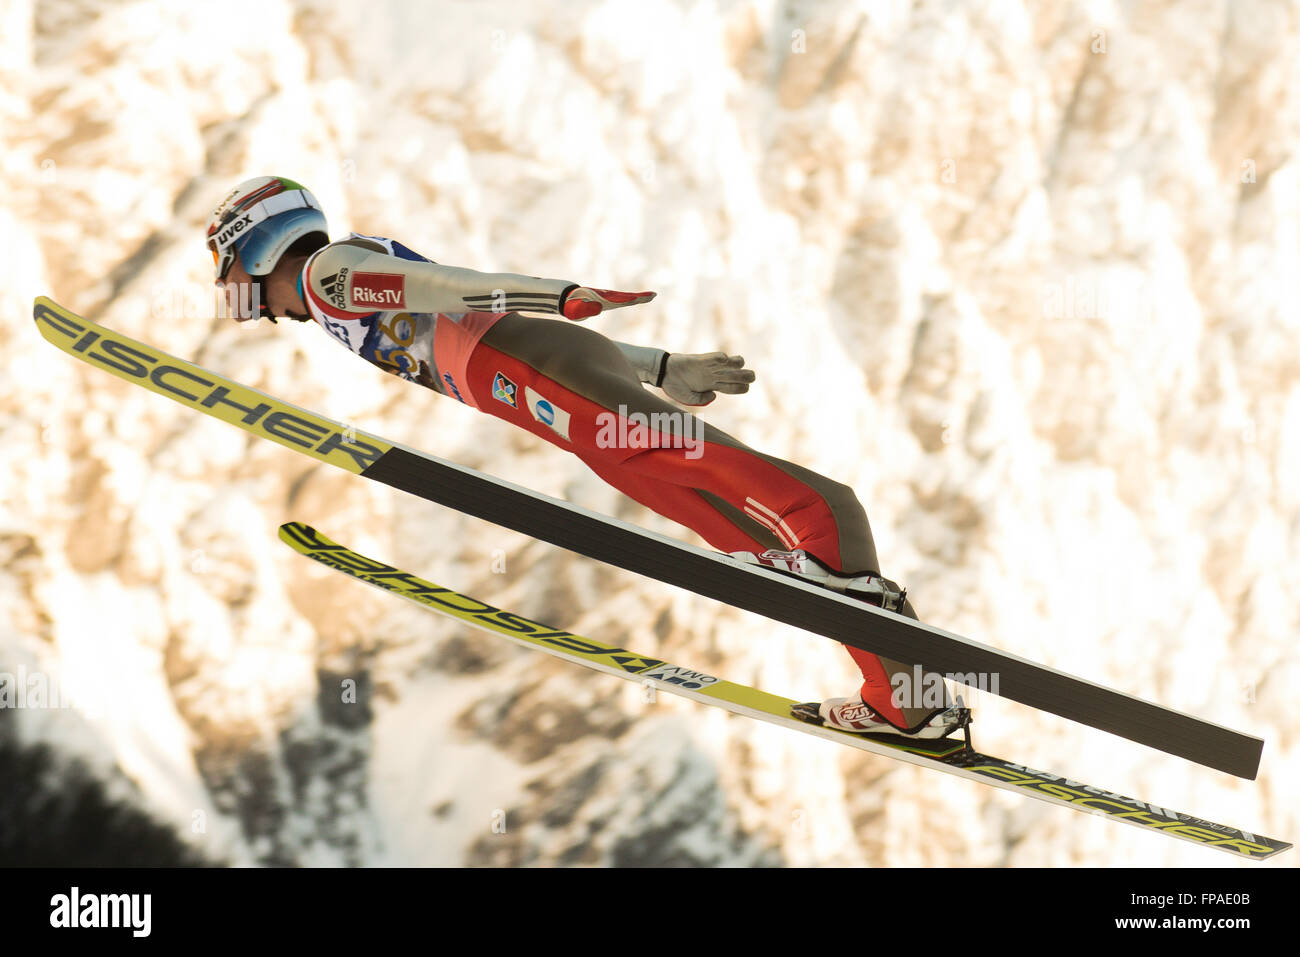 Planica, Slovenia. 18th Mar, 2016. Daniel Andre Tande of Norway competes during Planica FIS Ski Jumping World Cup final on the March 18, 2016 in Planica, Slovenia. © Rok Rakun/Pacific Press/Alamy Live News Stock Photo